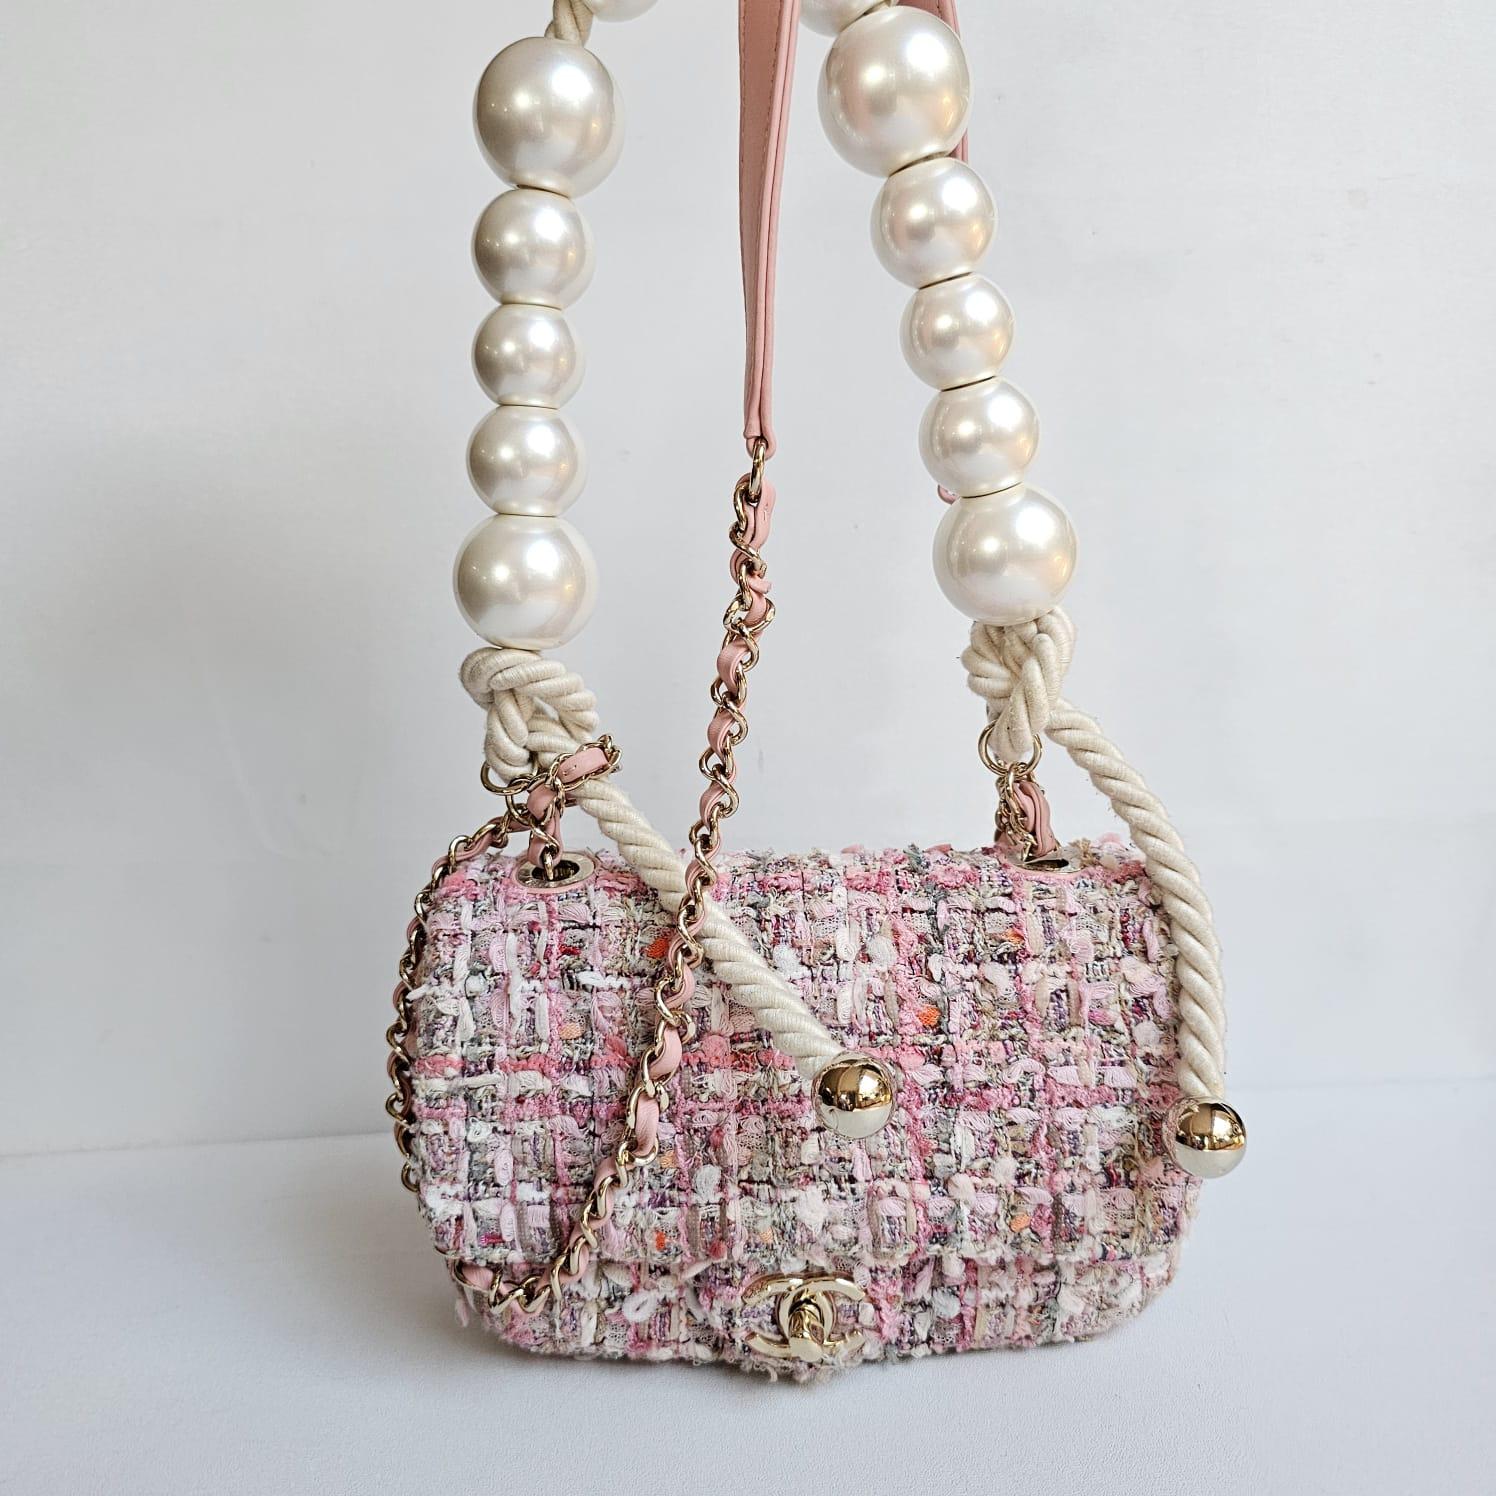 Chanel Mini Pink Tweed By The Sea Pearl Strap Flap Bag In Good Condition For Sale In Jakarta, Daerah Khusus Ibukota Jakarta